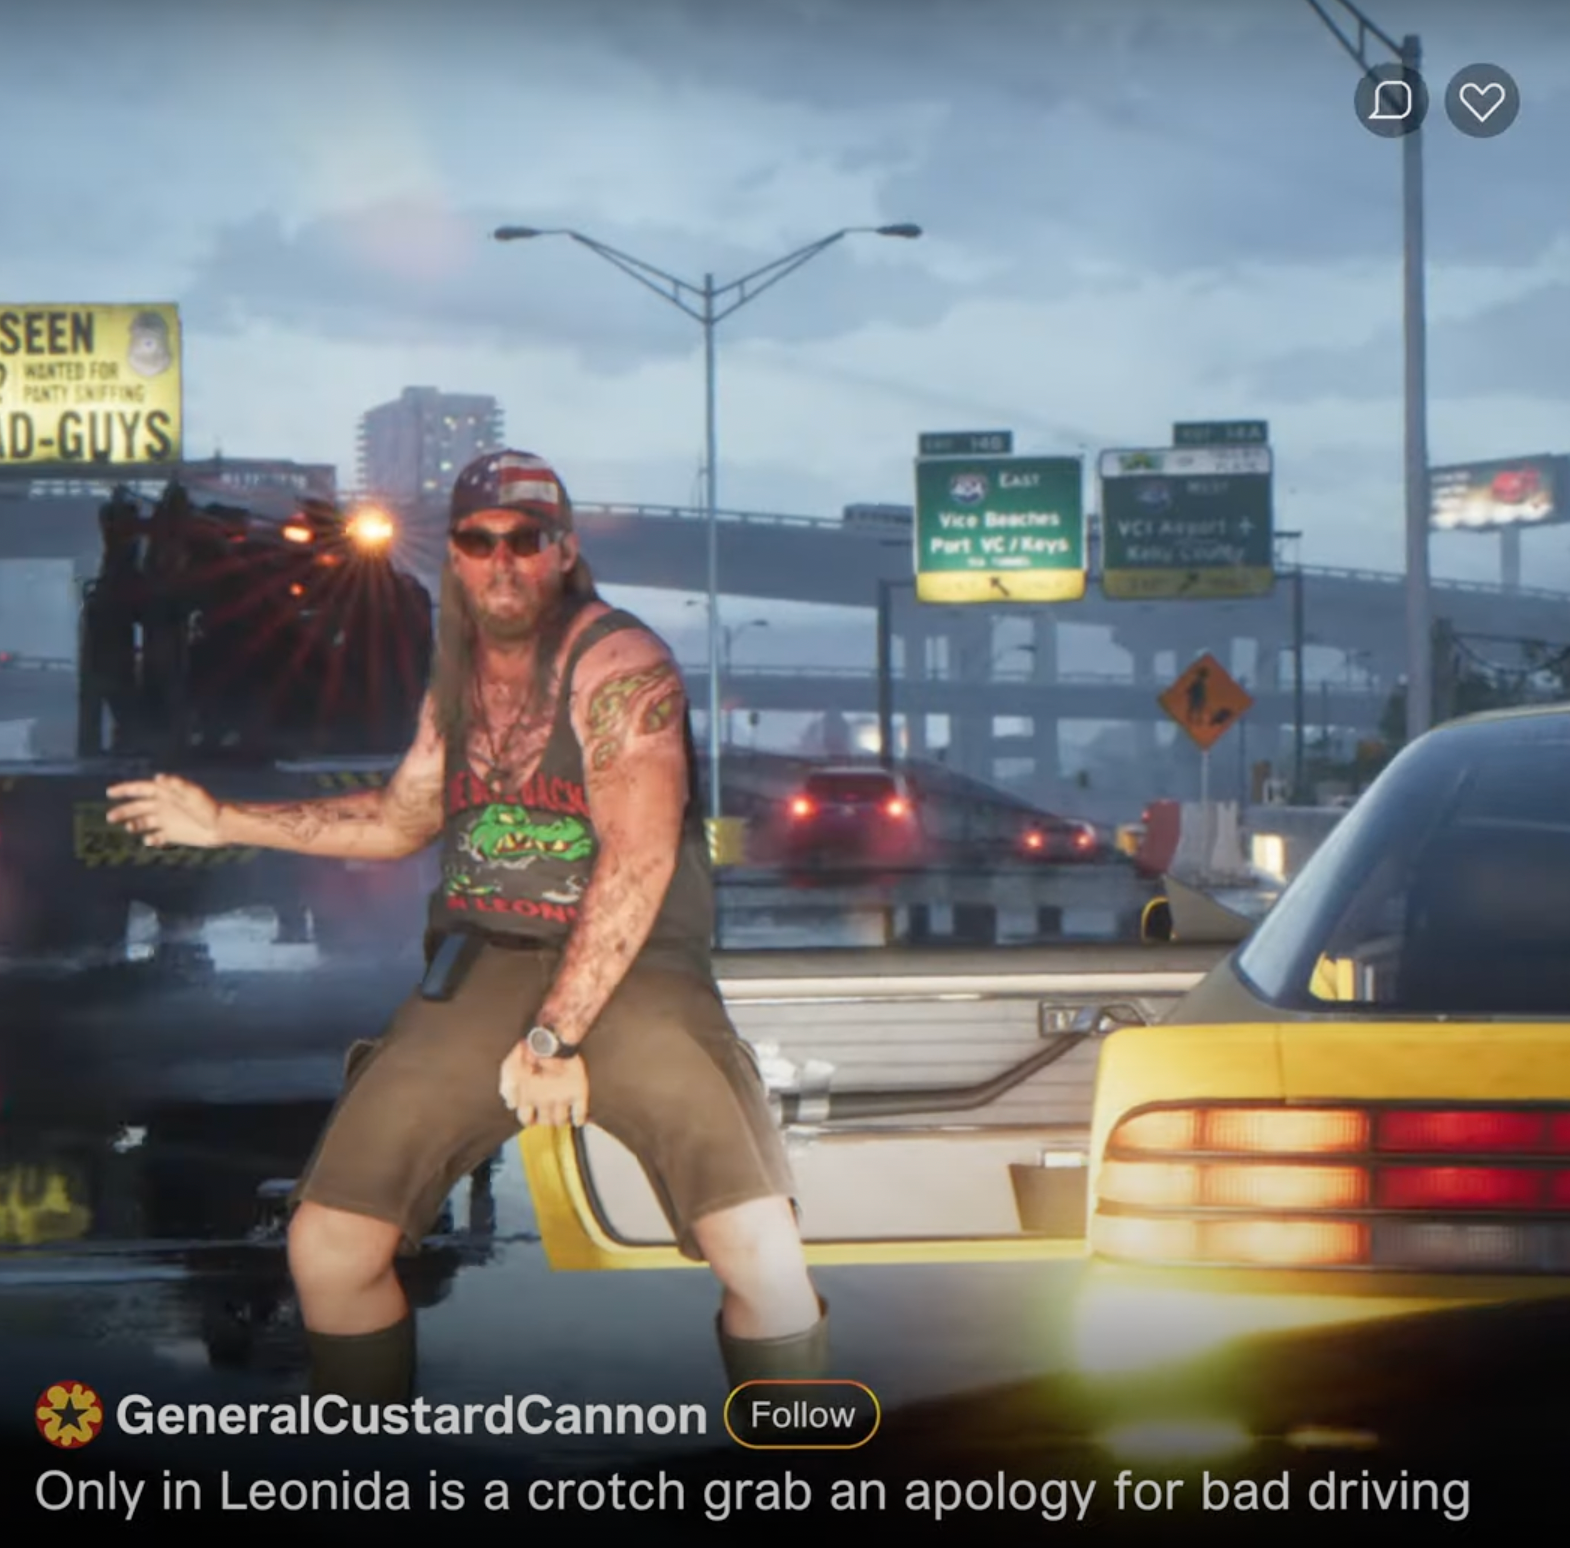 GTA 6 stuns fans with shocking early trailer drop after leak – but players  will be waiting a while for release